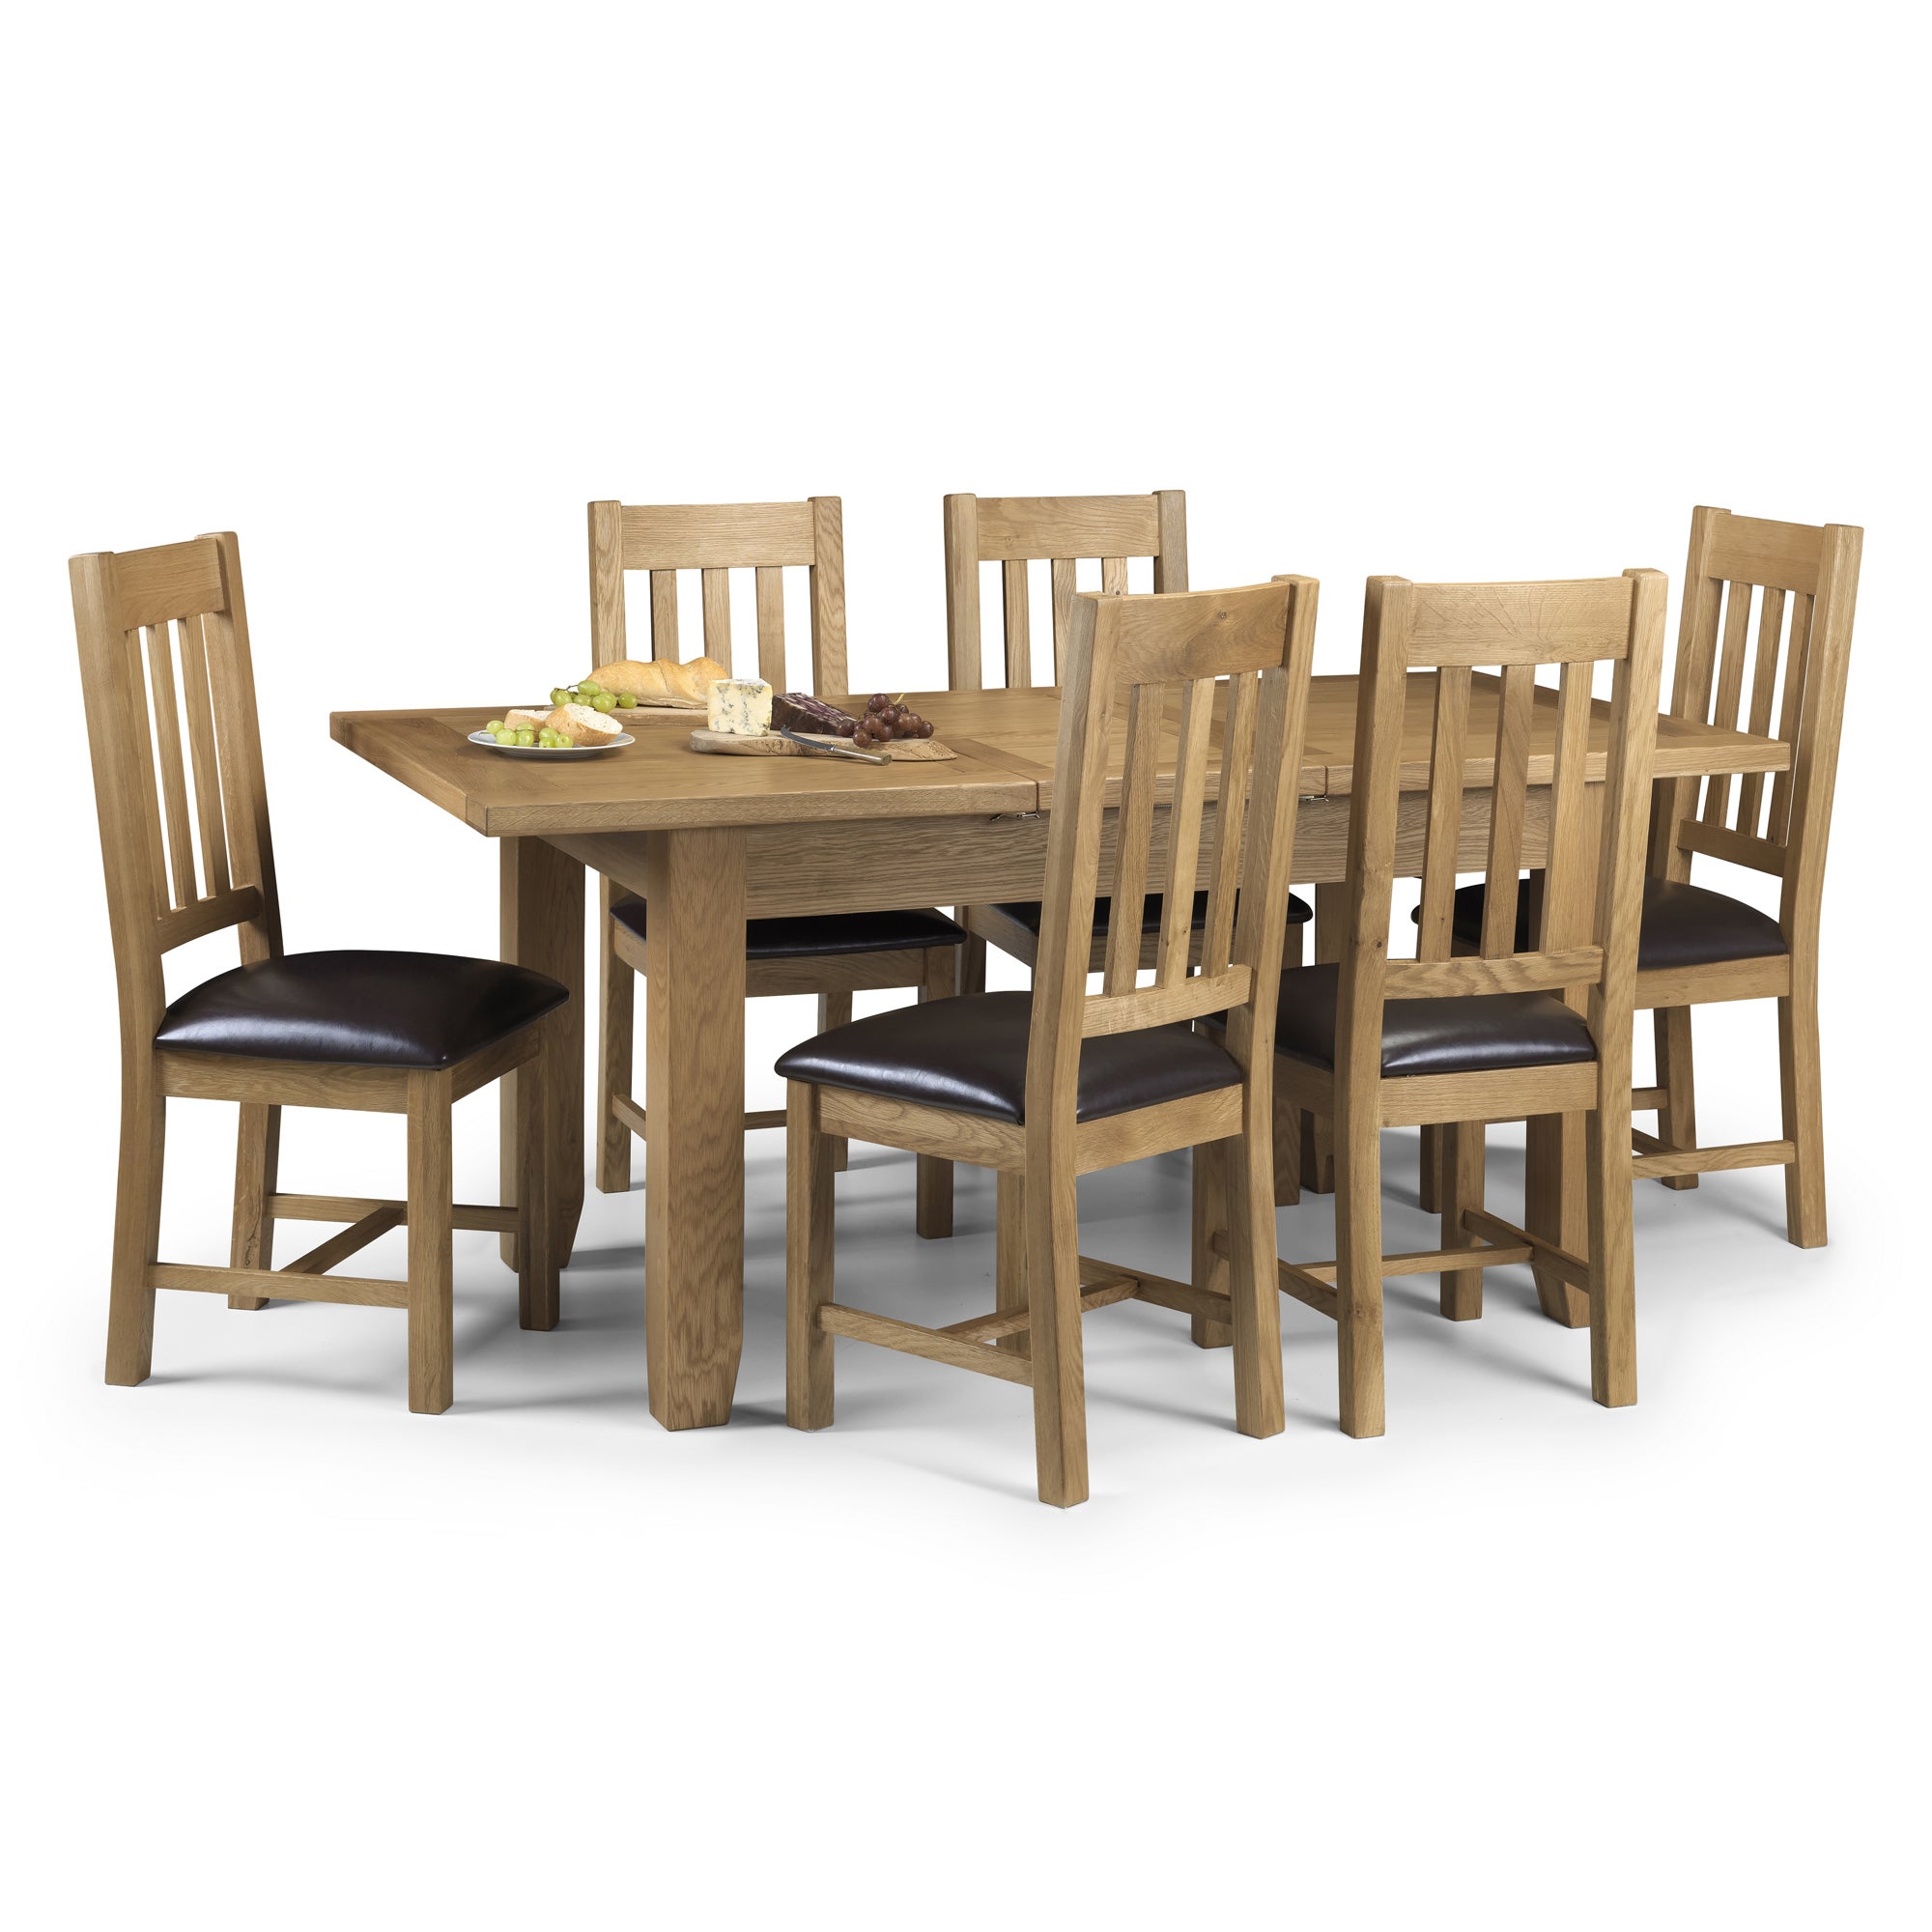 Astoria Rectangular Extendable Dining Table With 6 Chairs Solid Oak Brown